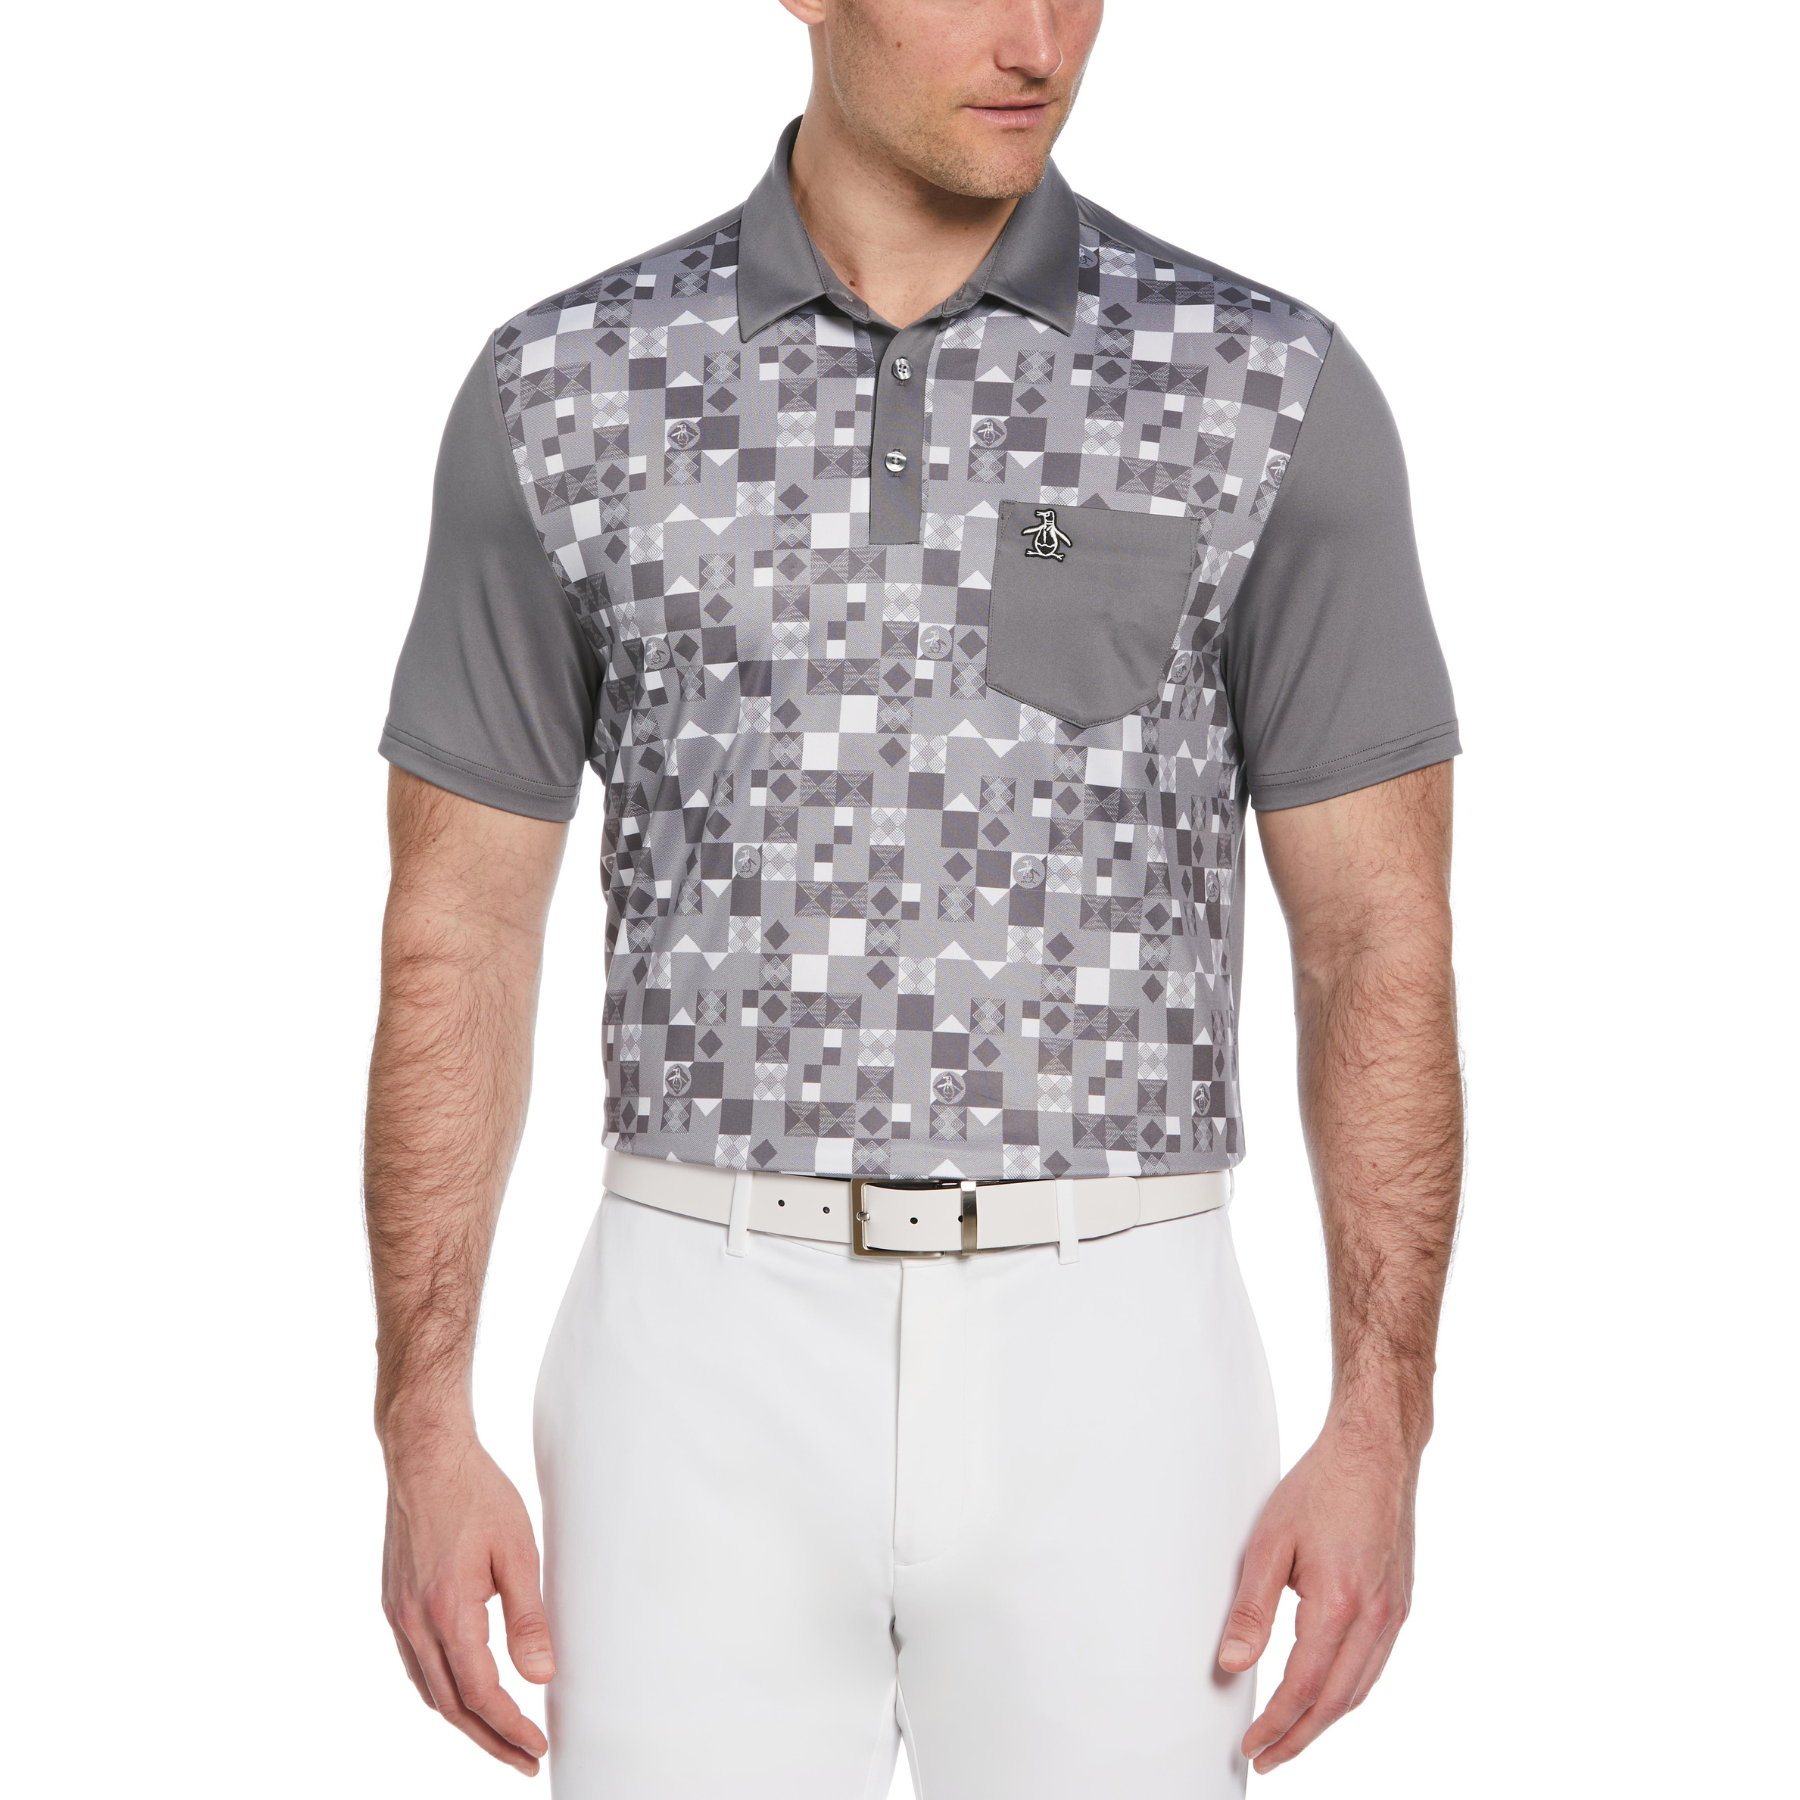 View 50s Color Block Print Golf Polo Shirt In Quiet Shade information